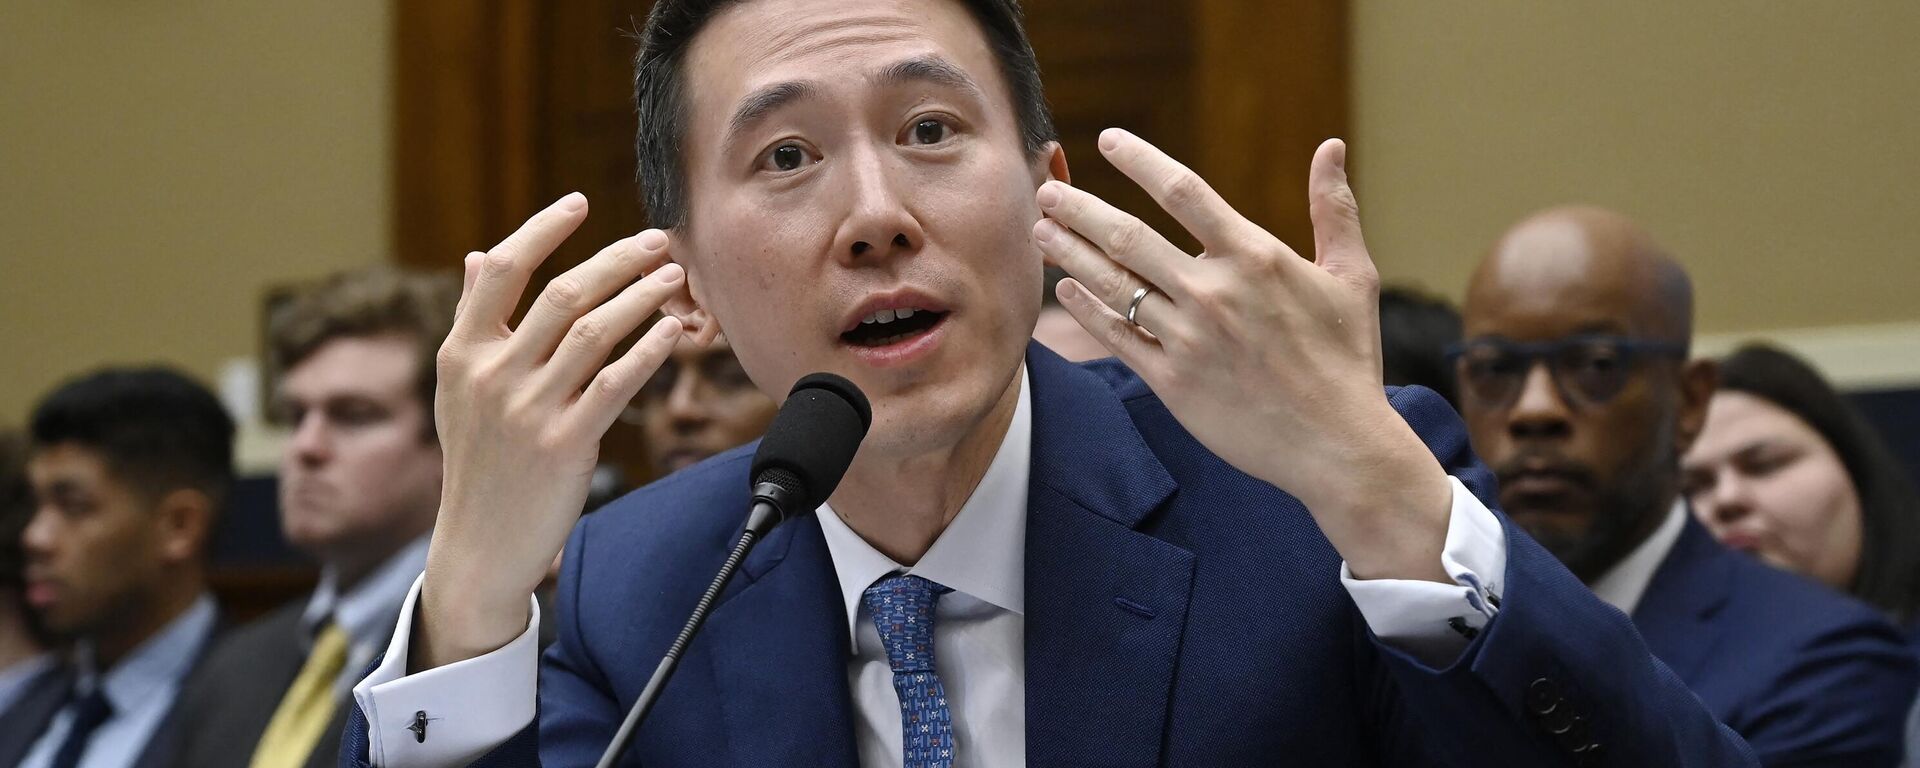 TikTok CEO Shou Zi Chew testifies before the House Energy and Commerce Committee hearing on TikTok: How Congress Can Safeguard American Data Privacy and Protect Children from Online Harms, on Capitol Hill, March 23, 2023, in Washington, DC - Sputnik International, 1920, 24.03.2023